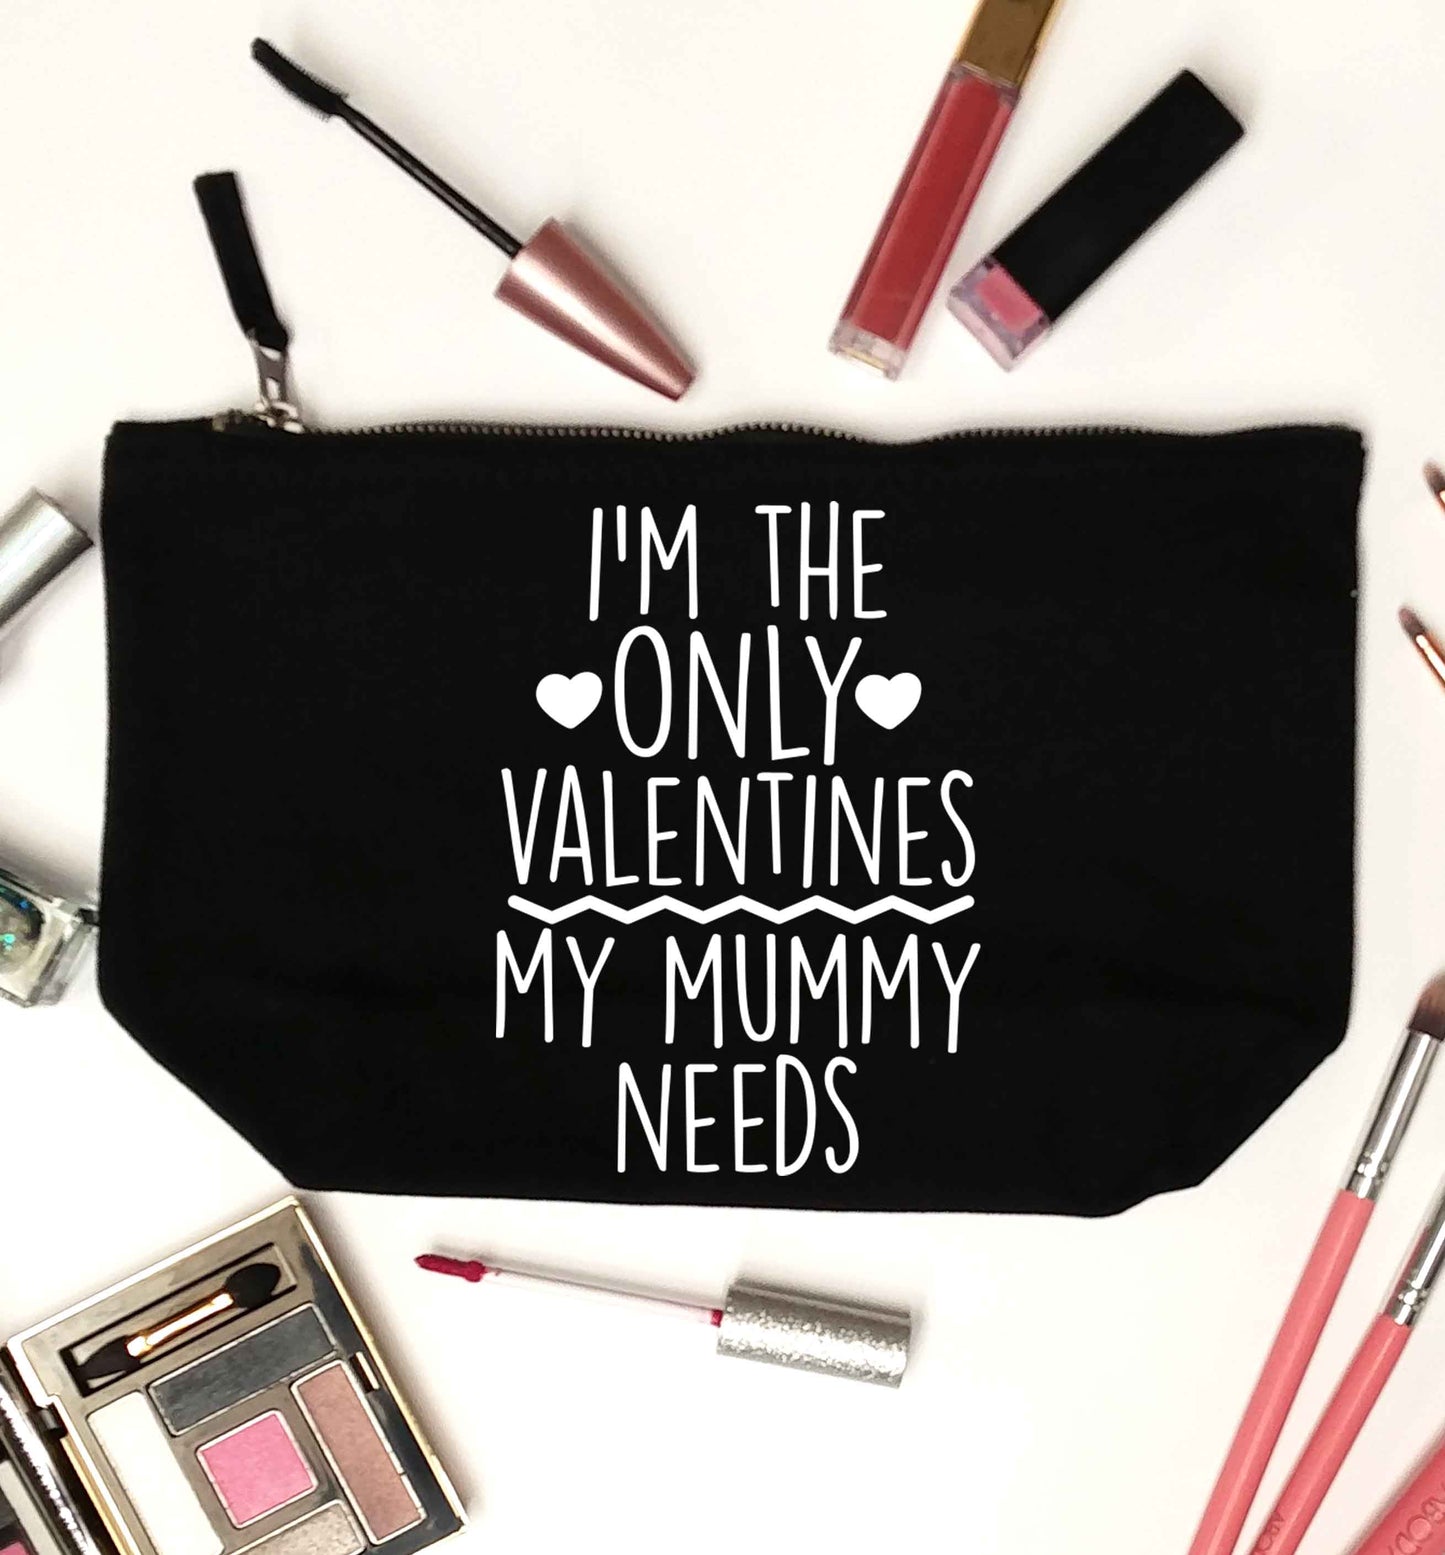 I'm the only valentines my mummy needs black makeup bag